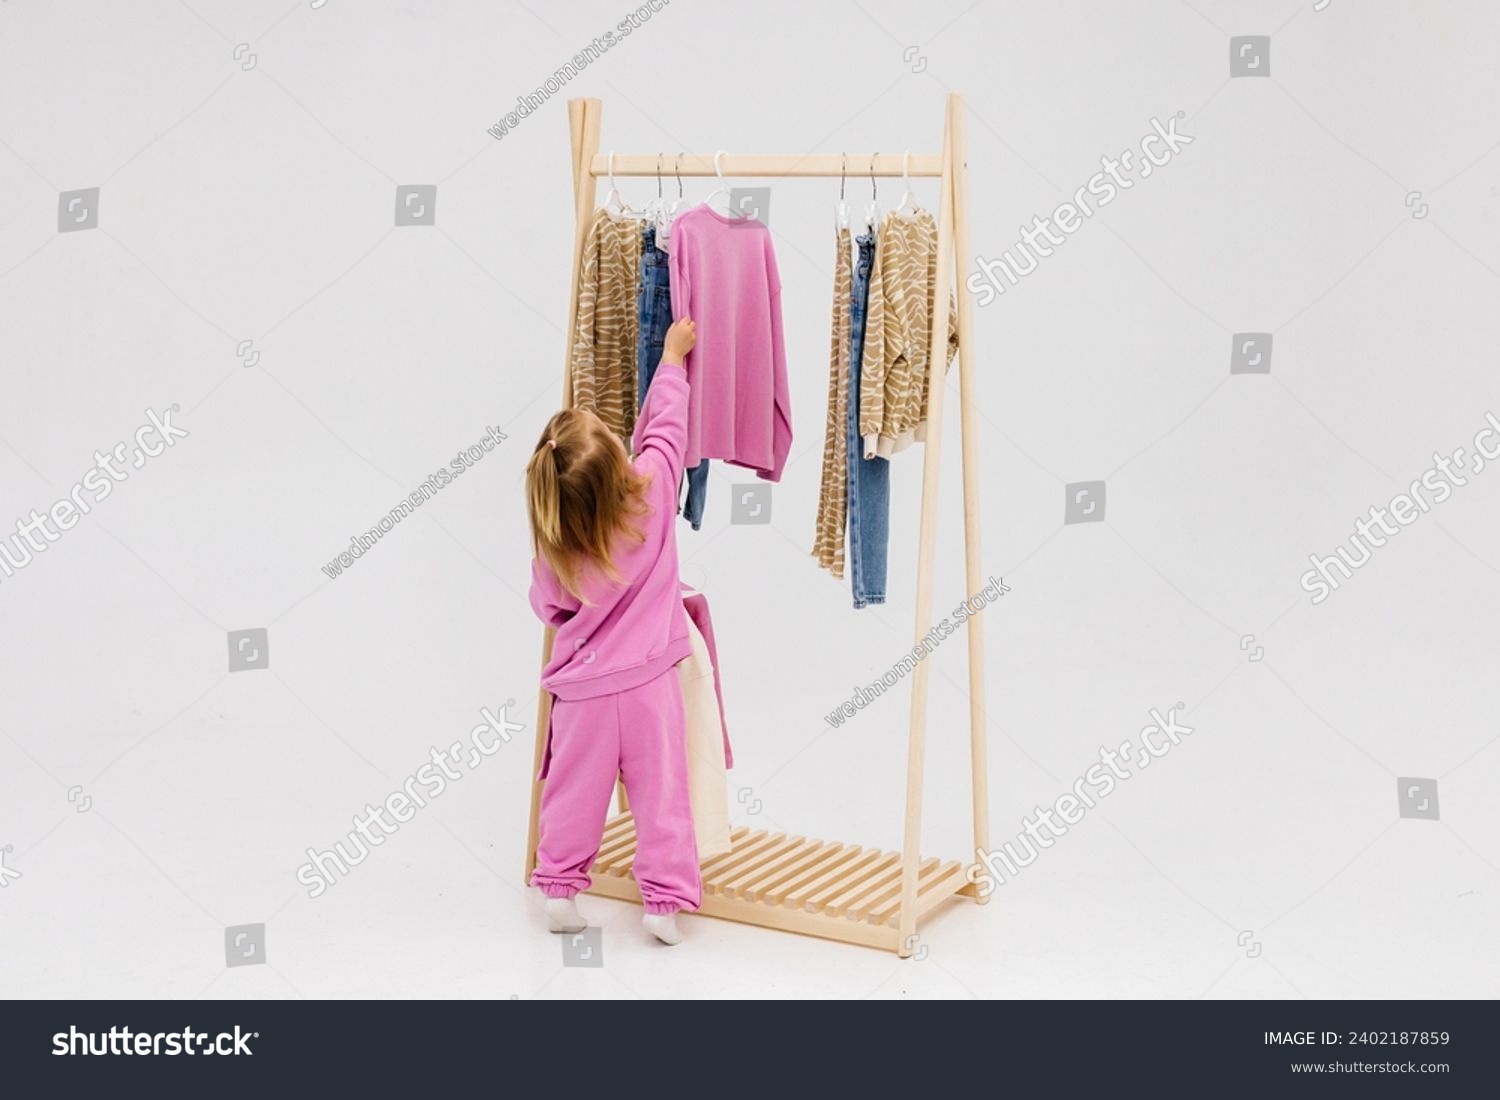 A child, a little girl, stands near the closet, chooses clothes against a light background. Dressing room with clothes on hangers. Wardrobe of children's and stylish clothes. Montessori wardrobe. #2402187859